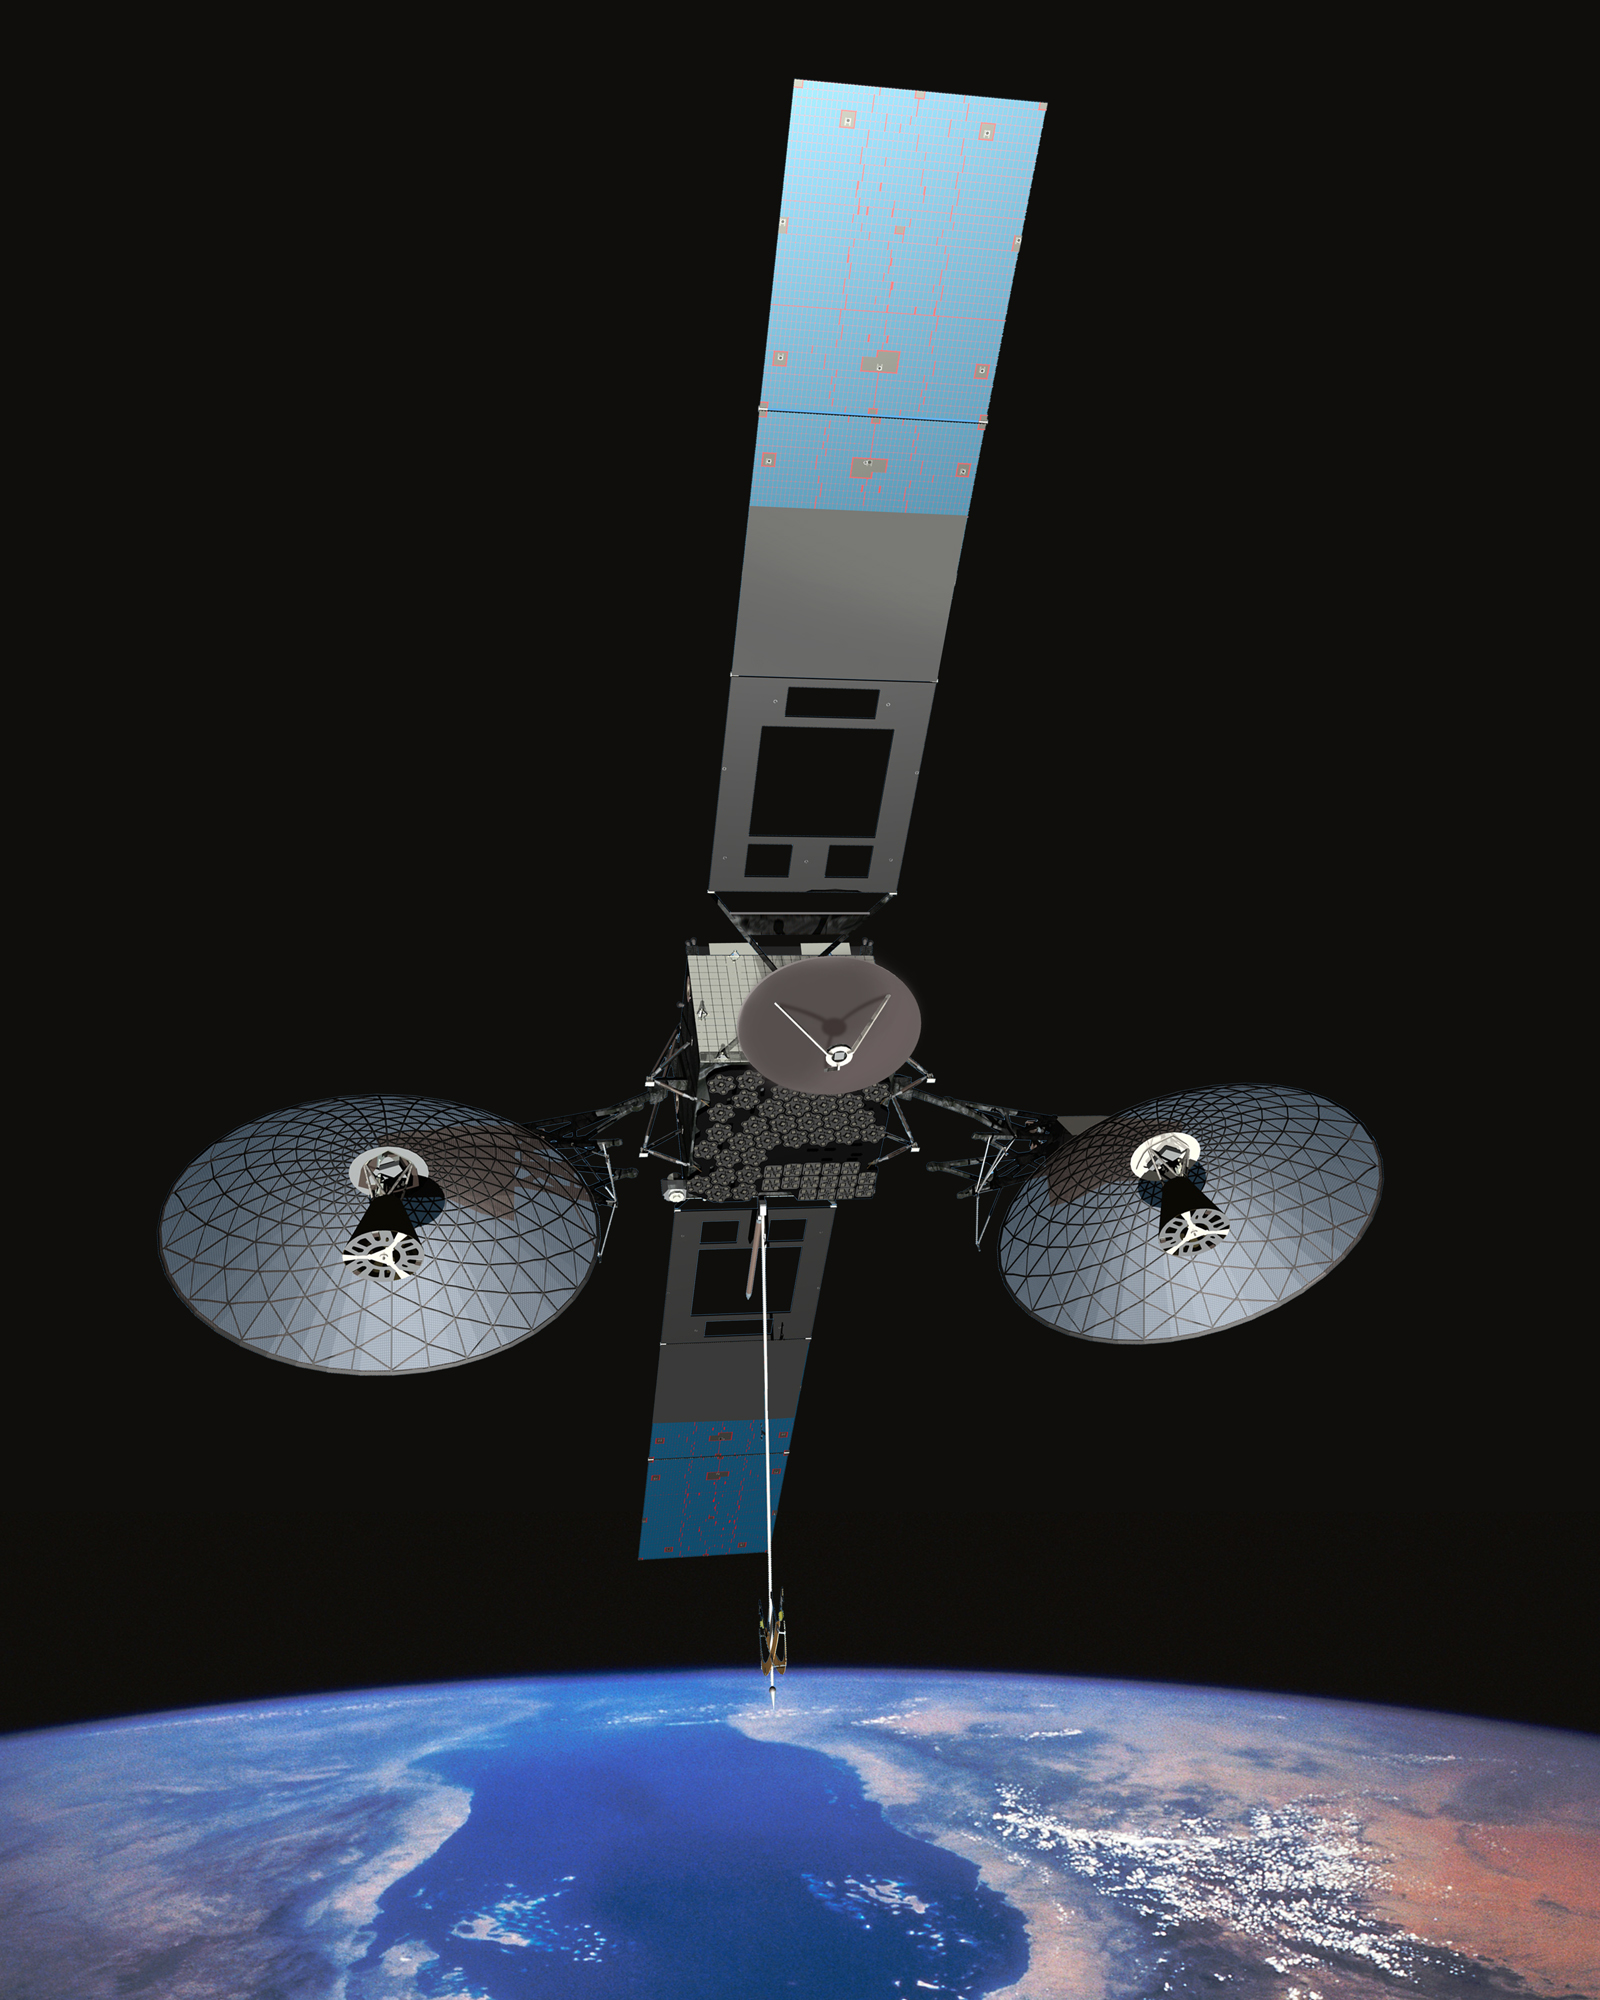 communications satellite in space